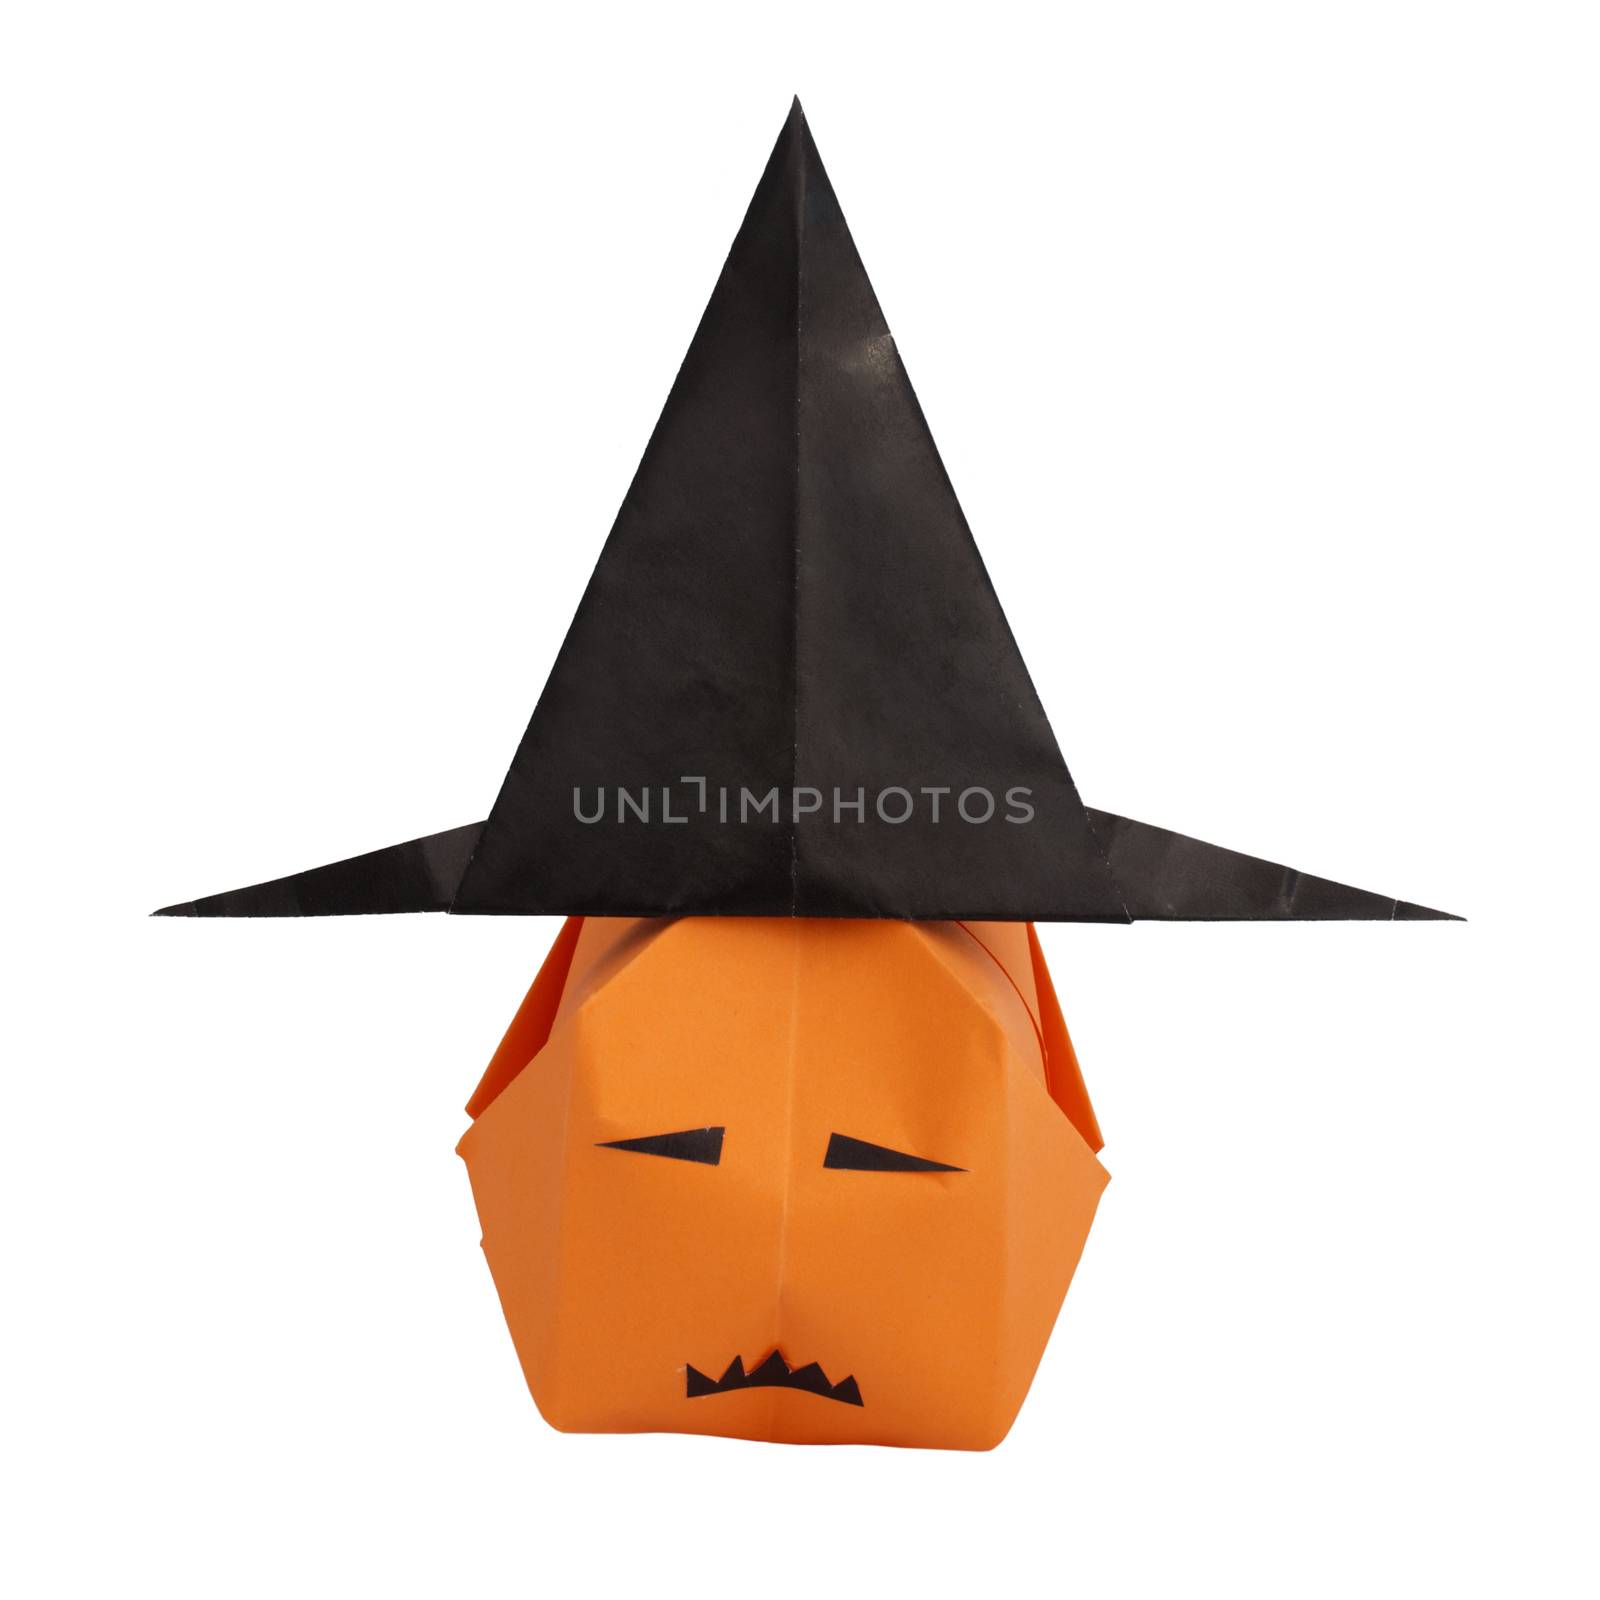 Witch hat and pumpkin 3D origami made